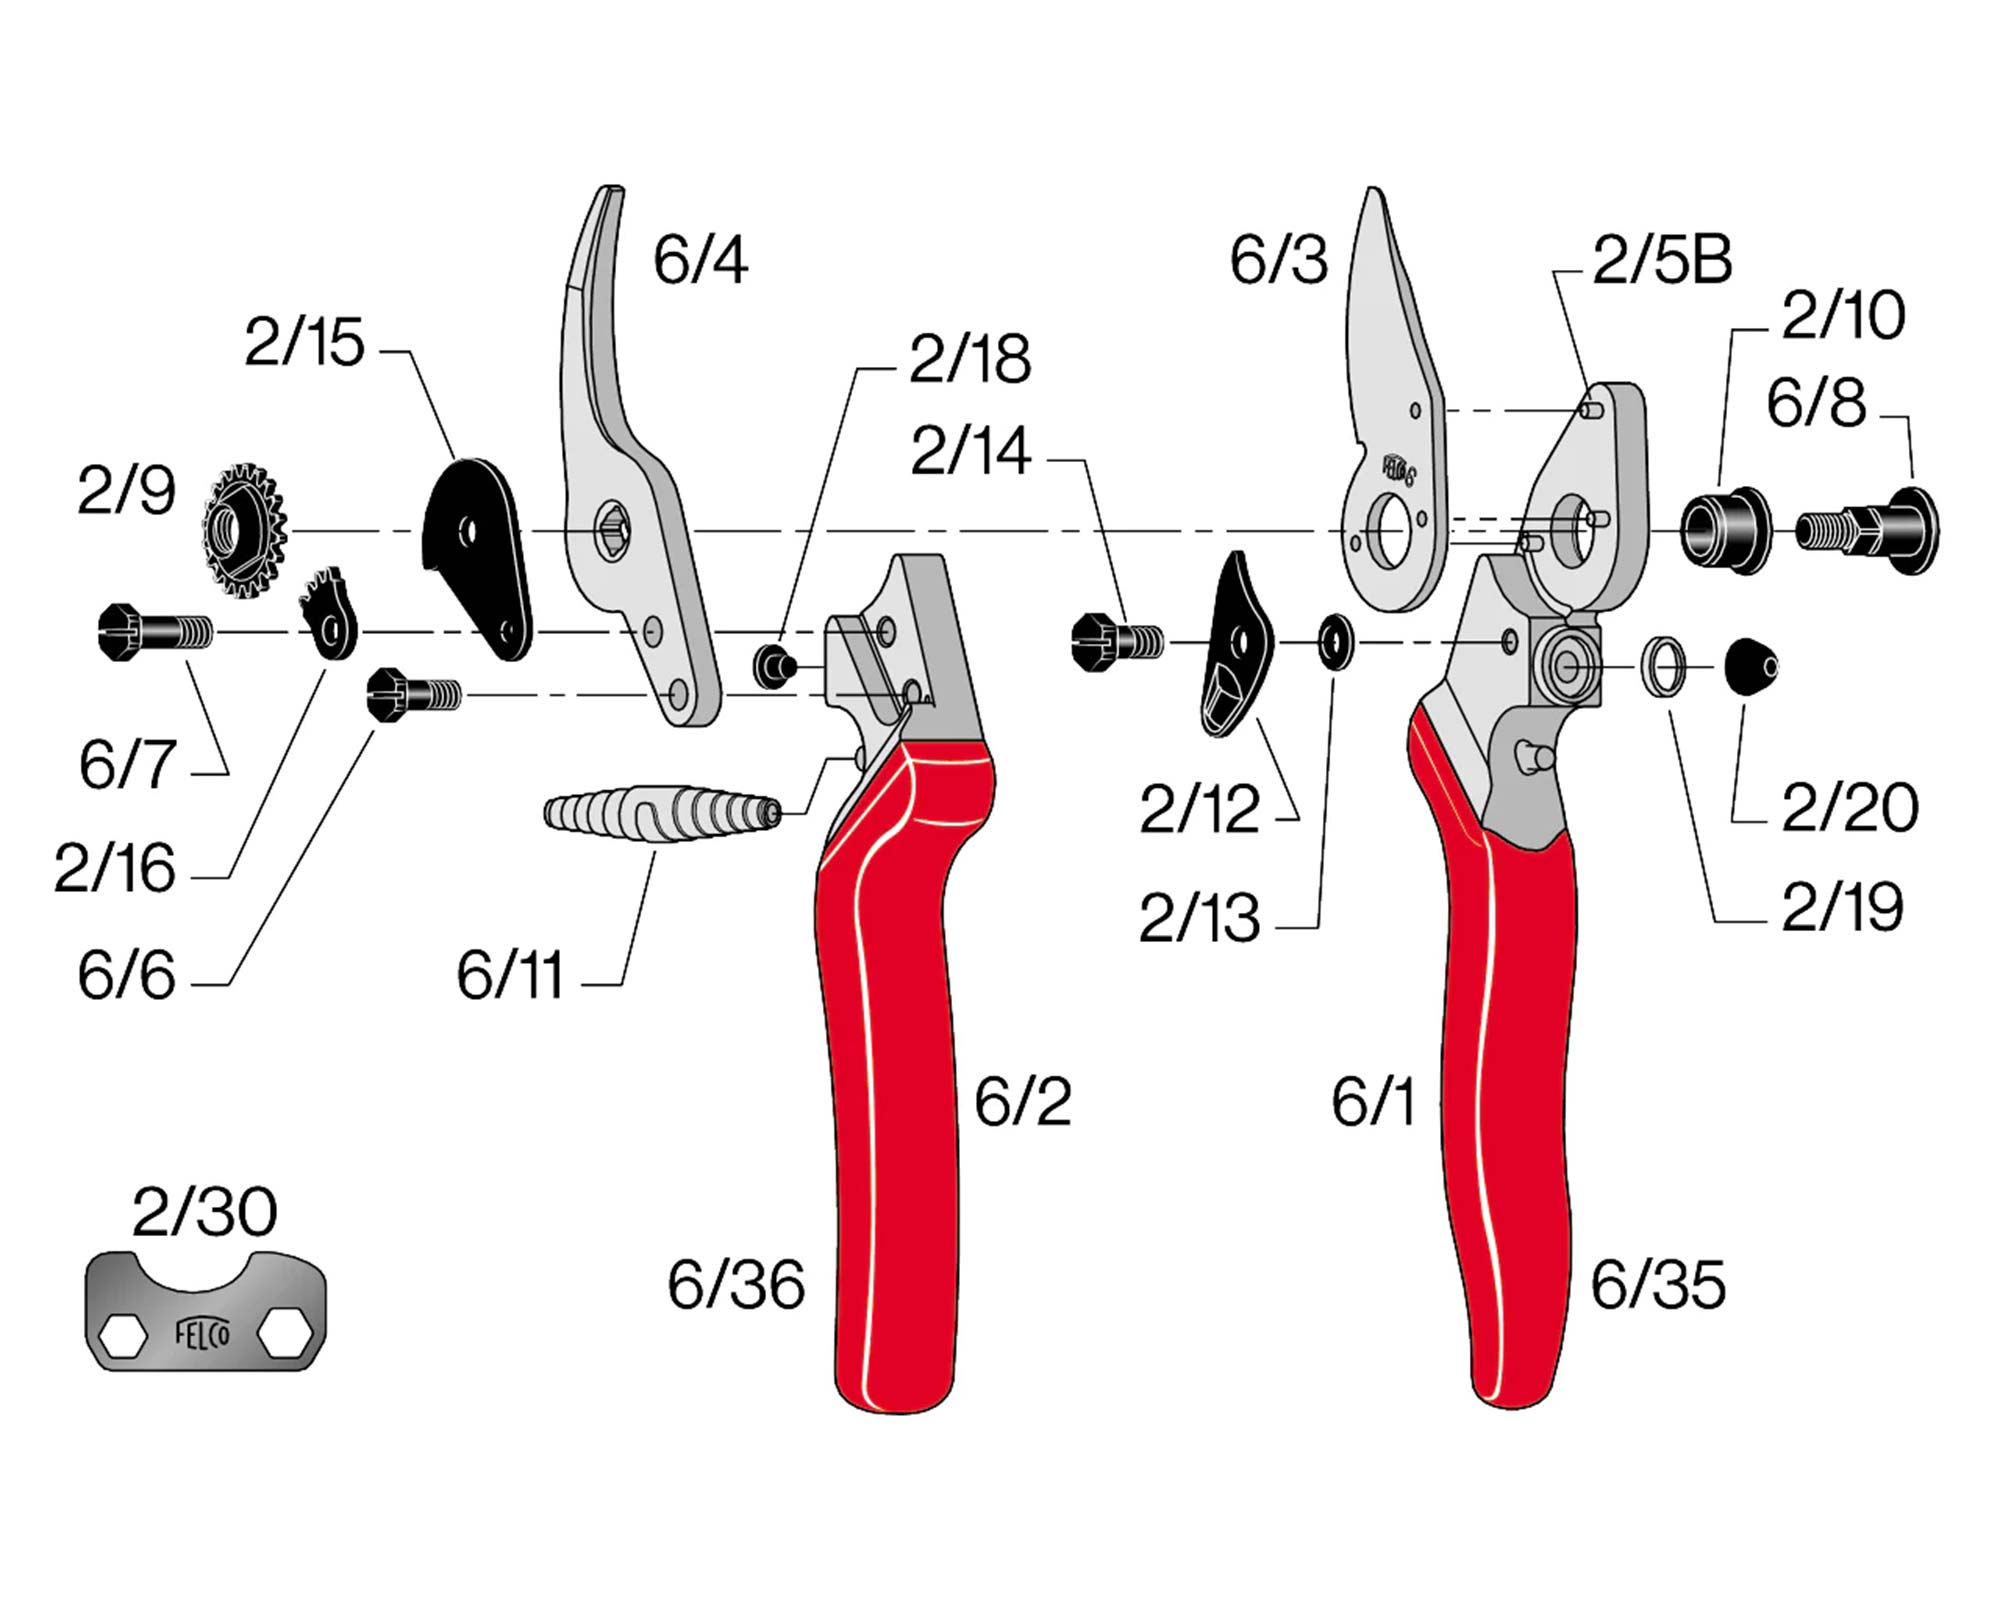 Diagram of parts for Felco 6 showing the part in question - being the spare blade 6/3.